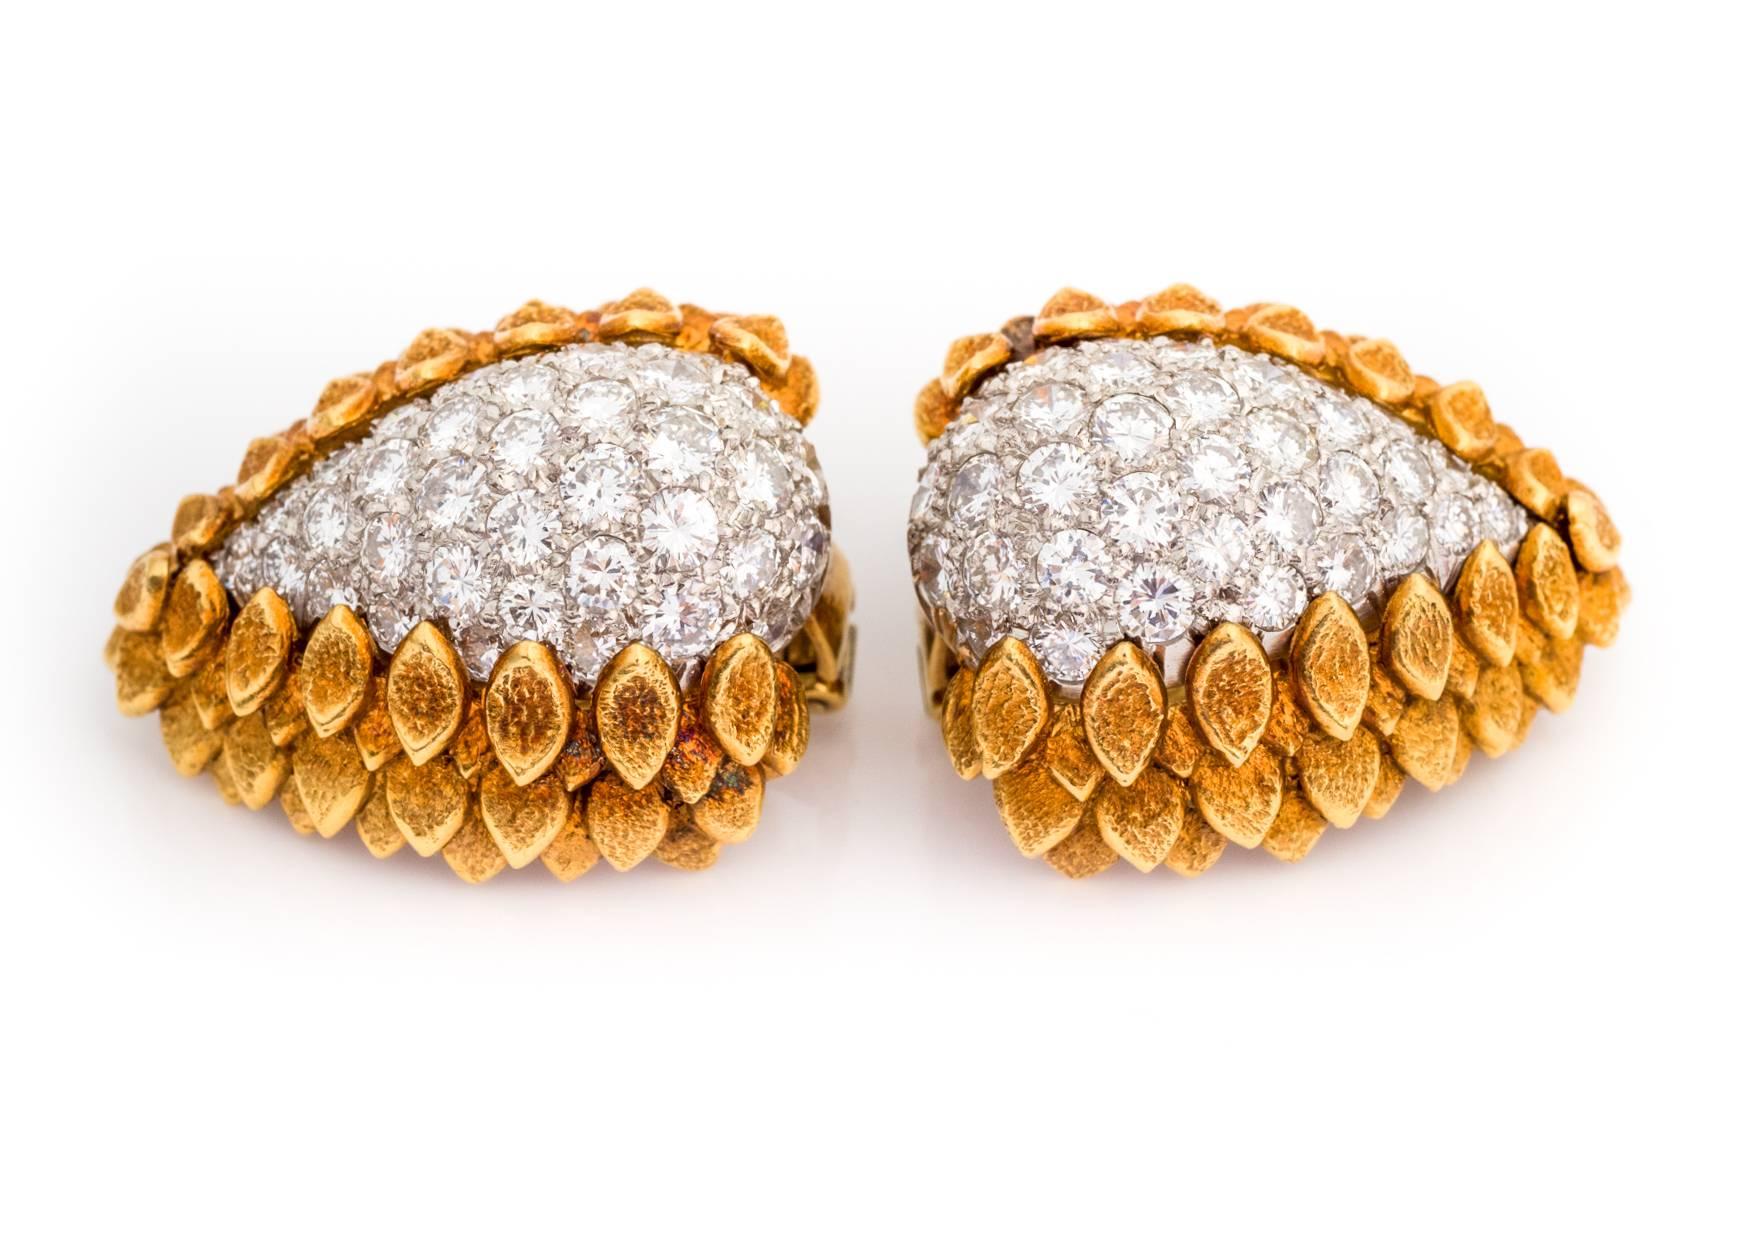 A fine pair of diamond and 18k yellow gold leaf motif earrings with clip on clasp mechanism that flips up or down. Several tiers of yellow gold stacked leaf frames surround the stunning diamond cluster weighing 4.05 carats. A superb crafted pair of